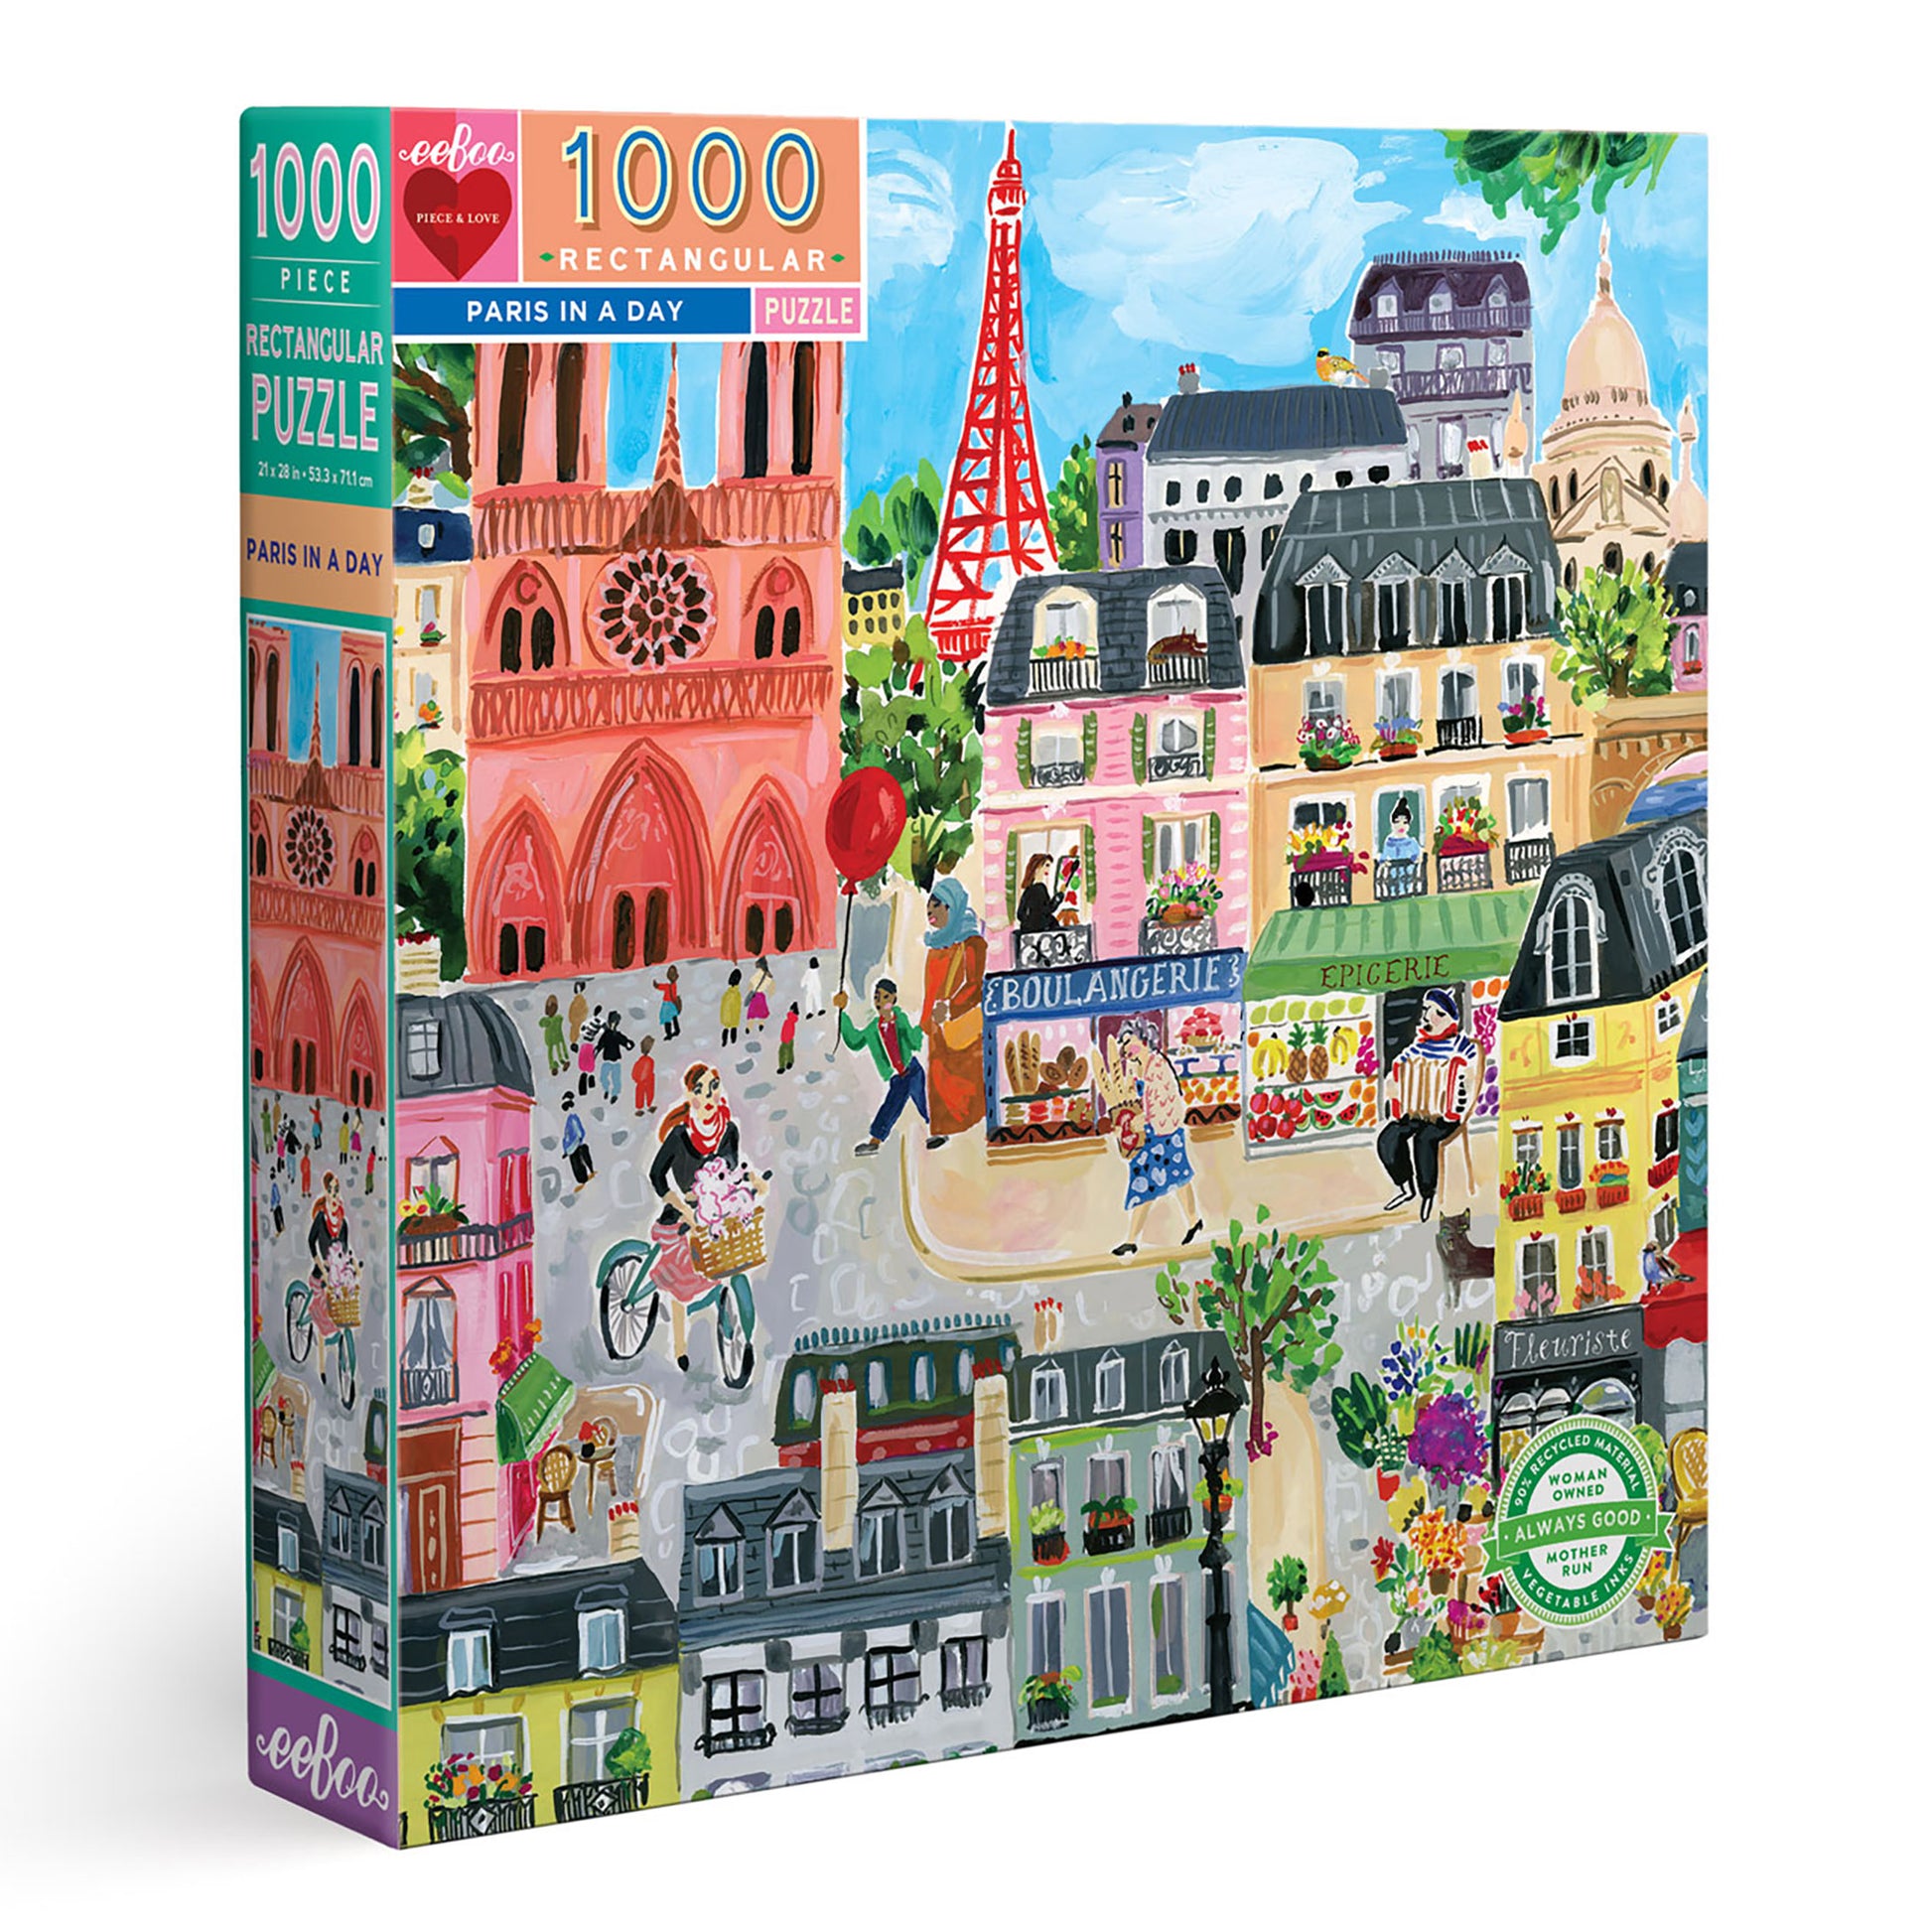 Jigsaw Puzzles 1000 Pieces for Adults - Paris Flower Street Landscape -  Wooden Puzzle - Unique Holiday Gift Suitable for Teenagers and Adults, Home